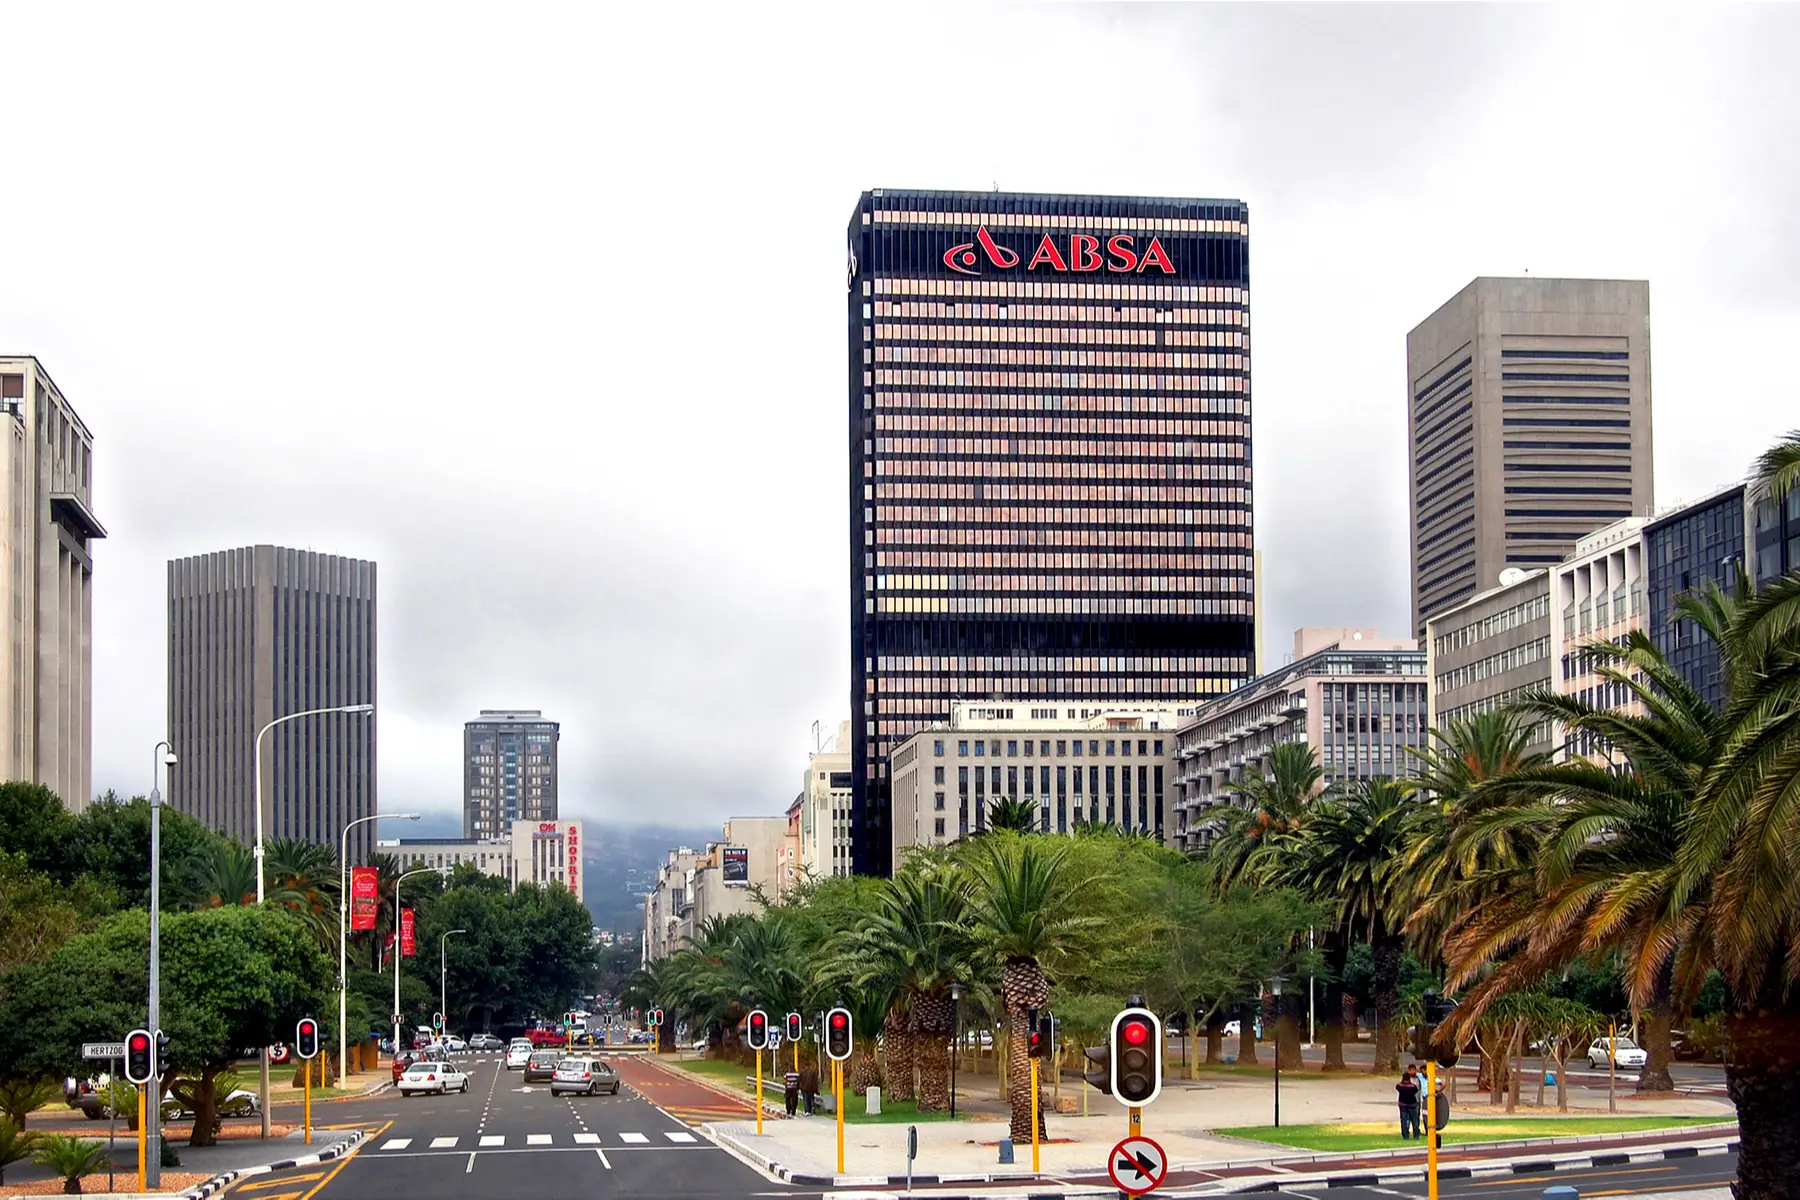 ABSA Bank tower in Cape Town